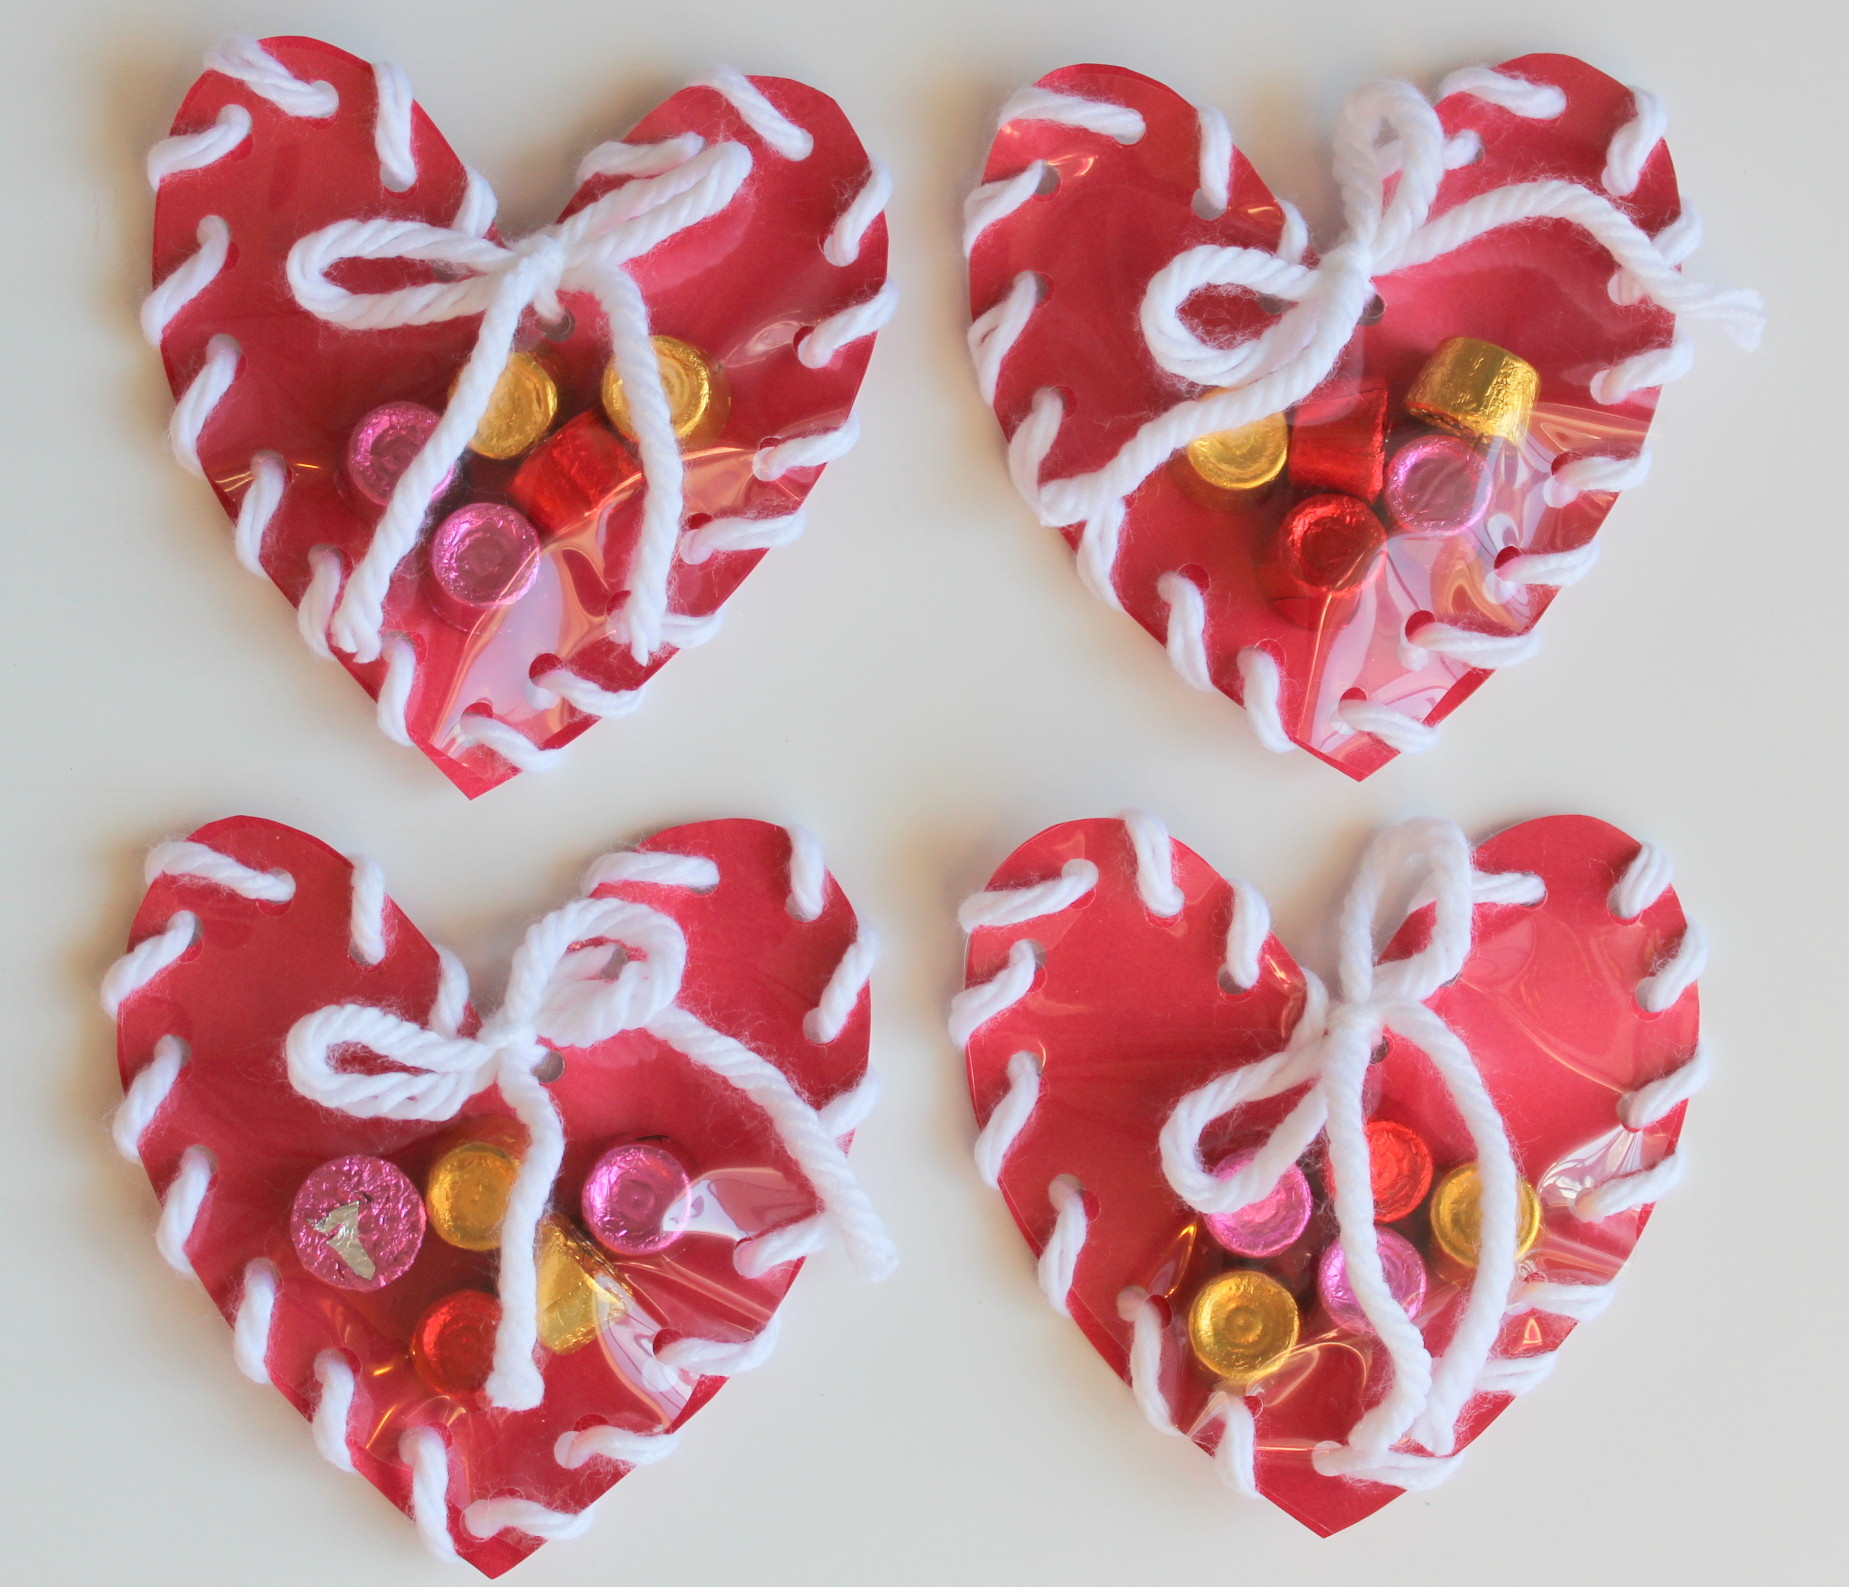 Valentines Day Crafts For Toddlers
 Lollydot Hand Sewn Paper Heart Valentine Craft for Kids